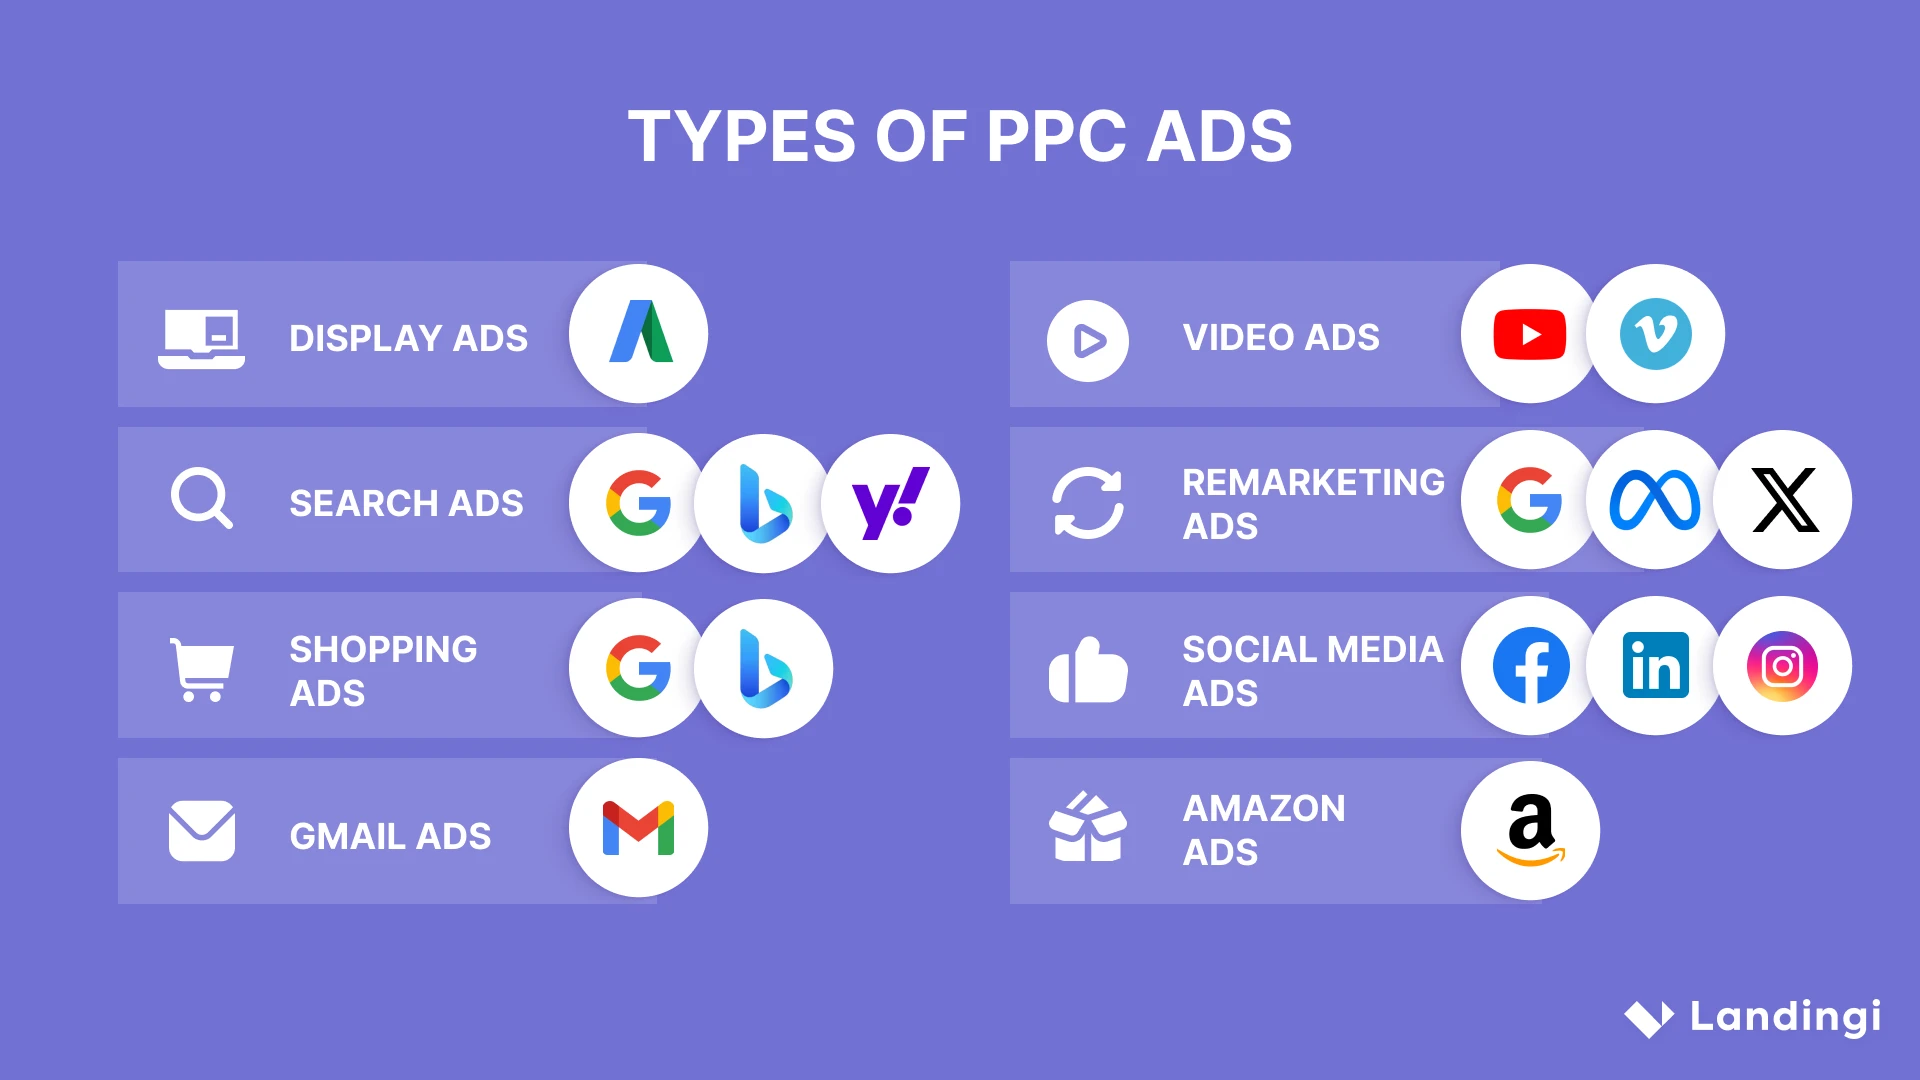 List of PPC ads types with platforms where they can be used